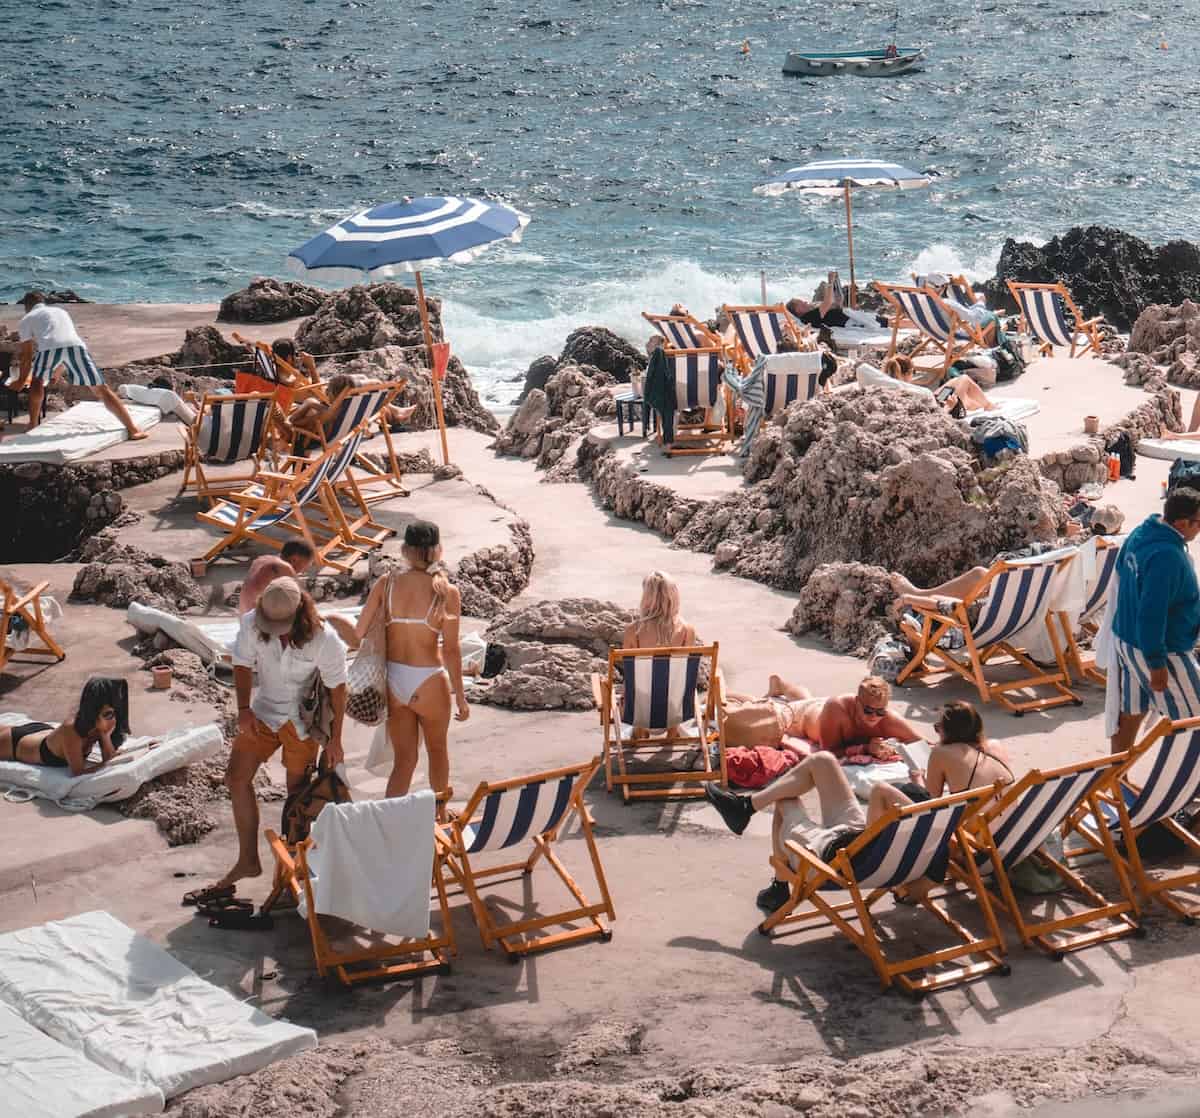 Beaches, like this one in Capri, can be crowded around the time of Ferrogosto